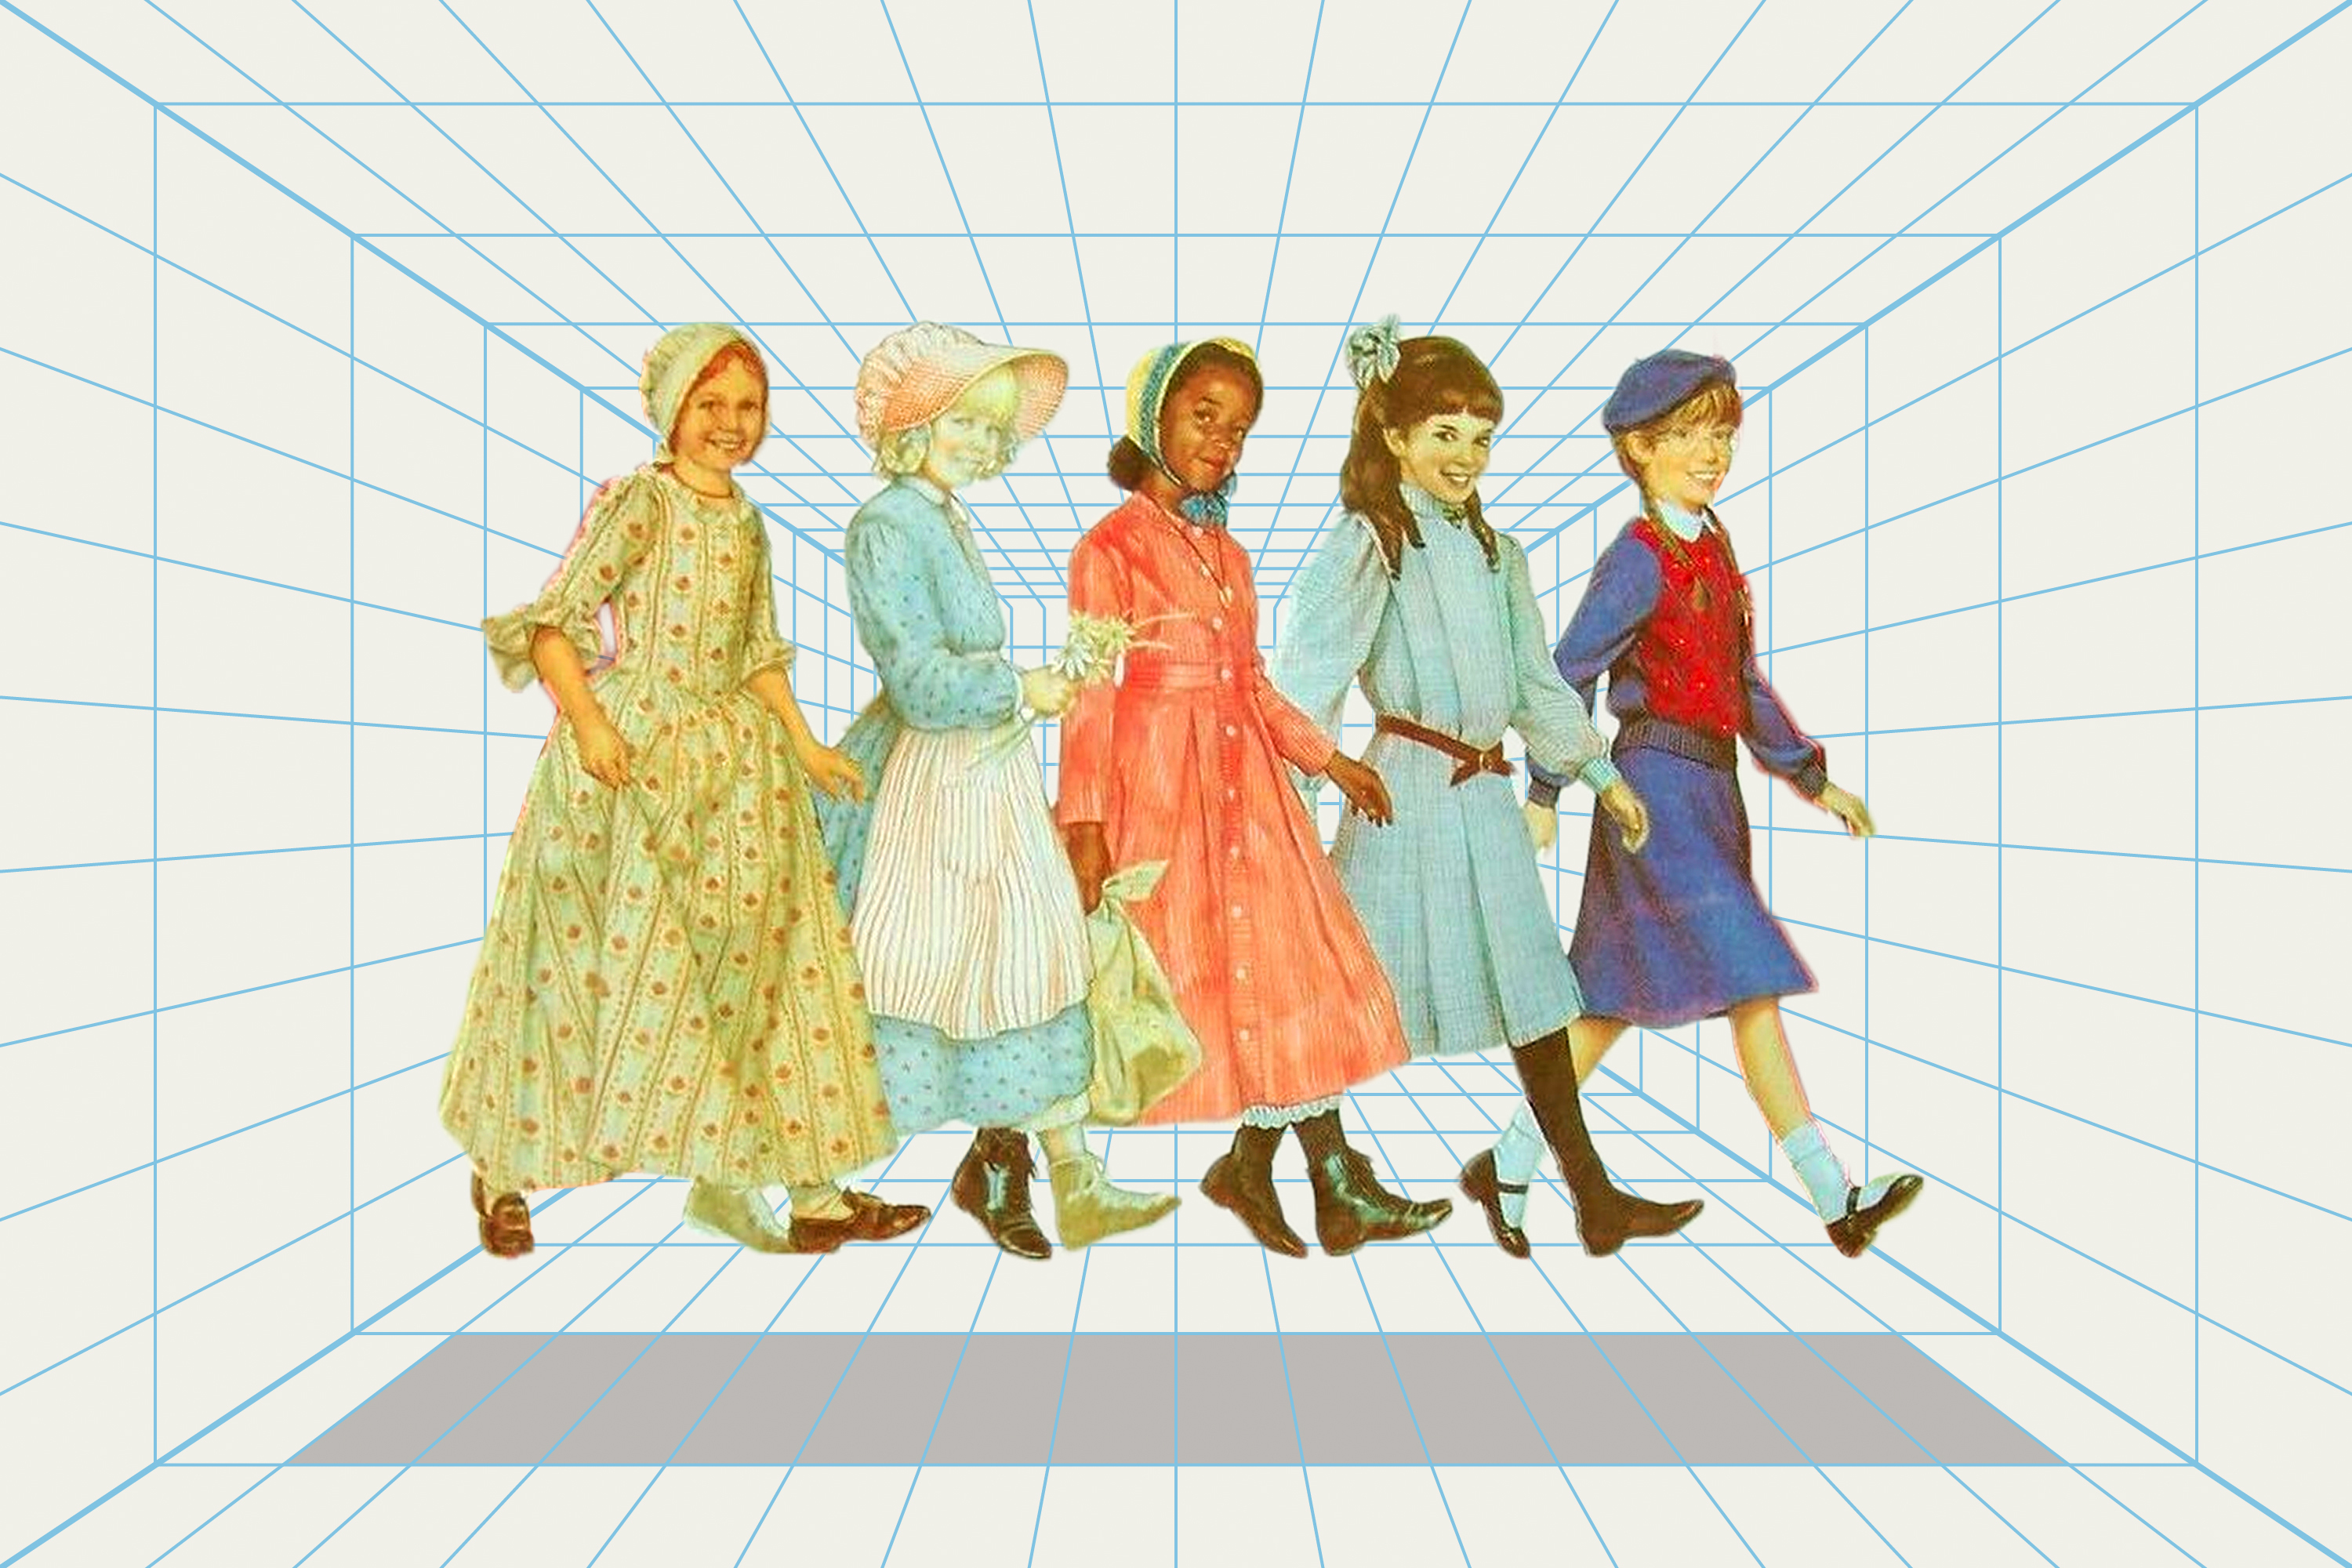 The characters from The American Girls Premiere stand in front of a grid